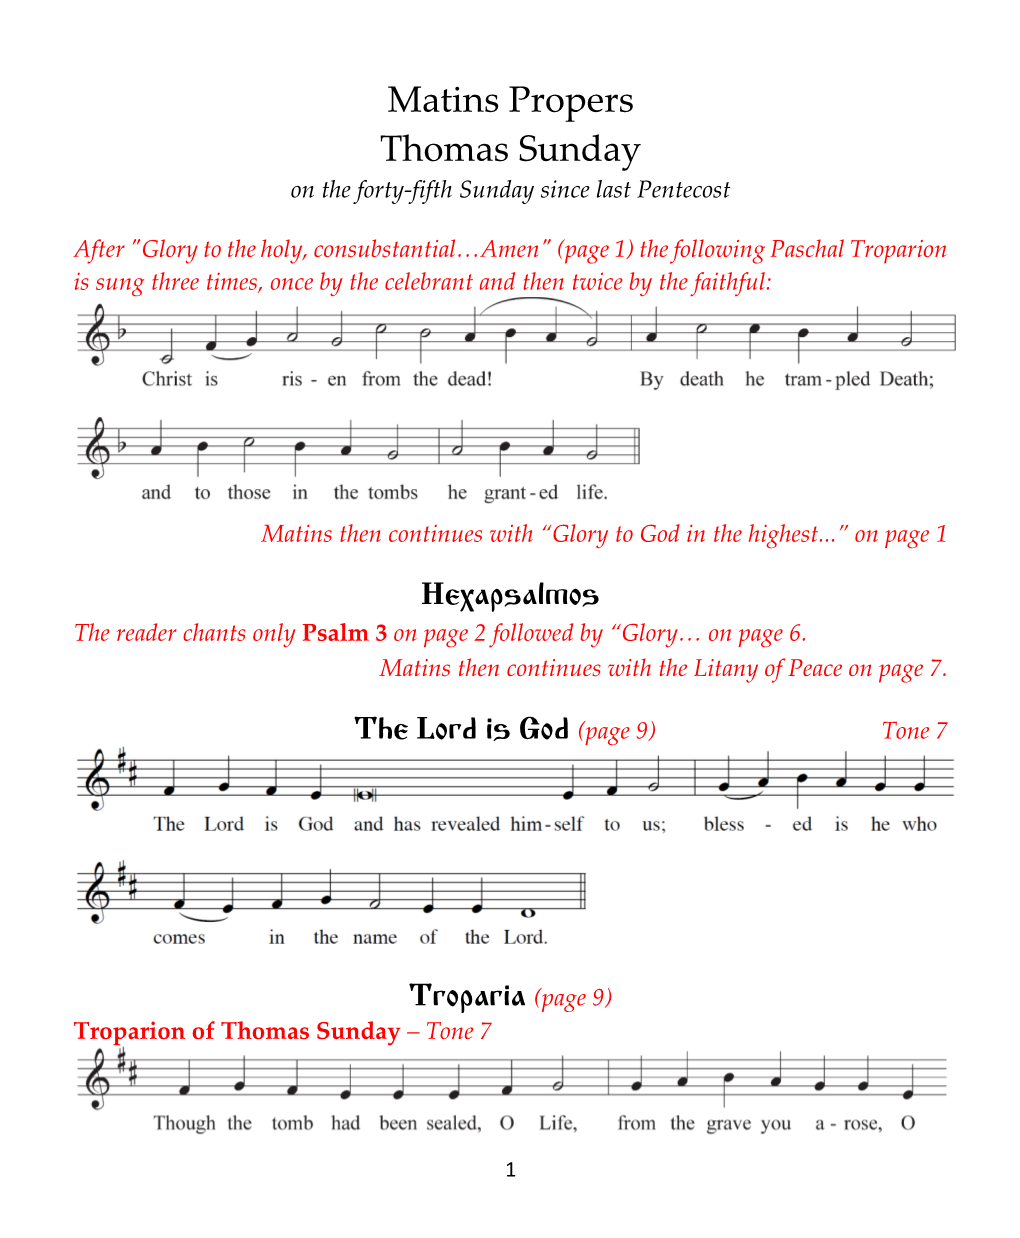 Matins Propers Thomas Sunday on the Forty-Fifth Sunday Since Last Pentecost